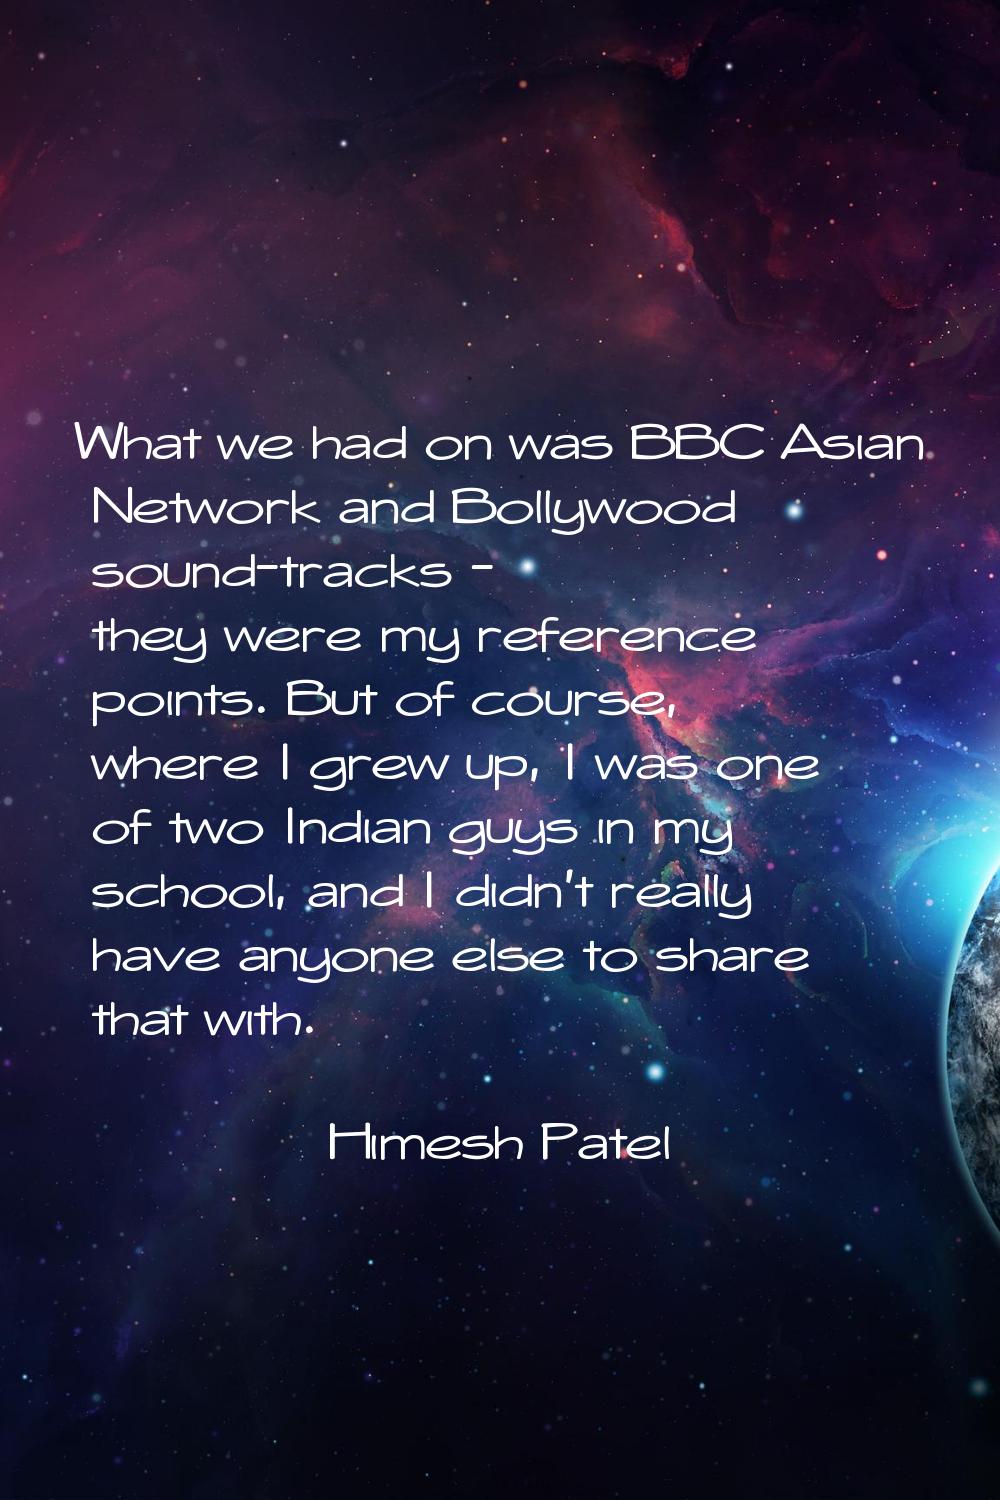 What we had on was BBC Asian Network and Bollywood sound-tracks - they were my reference points. Bu